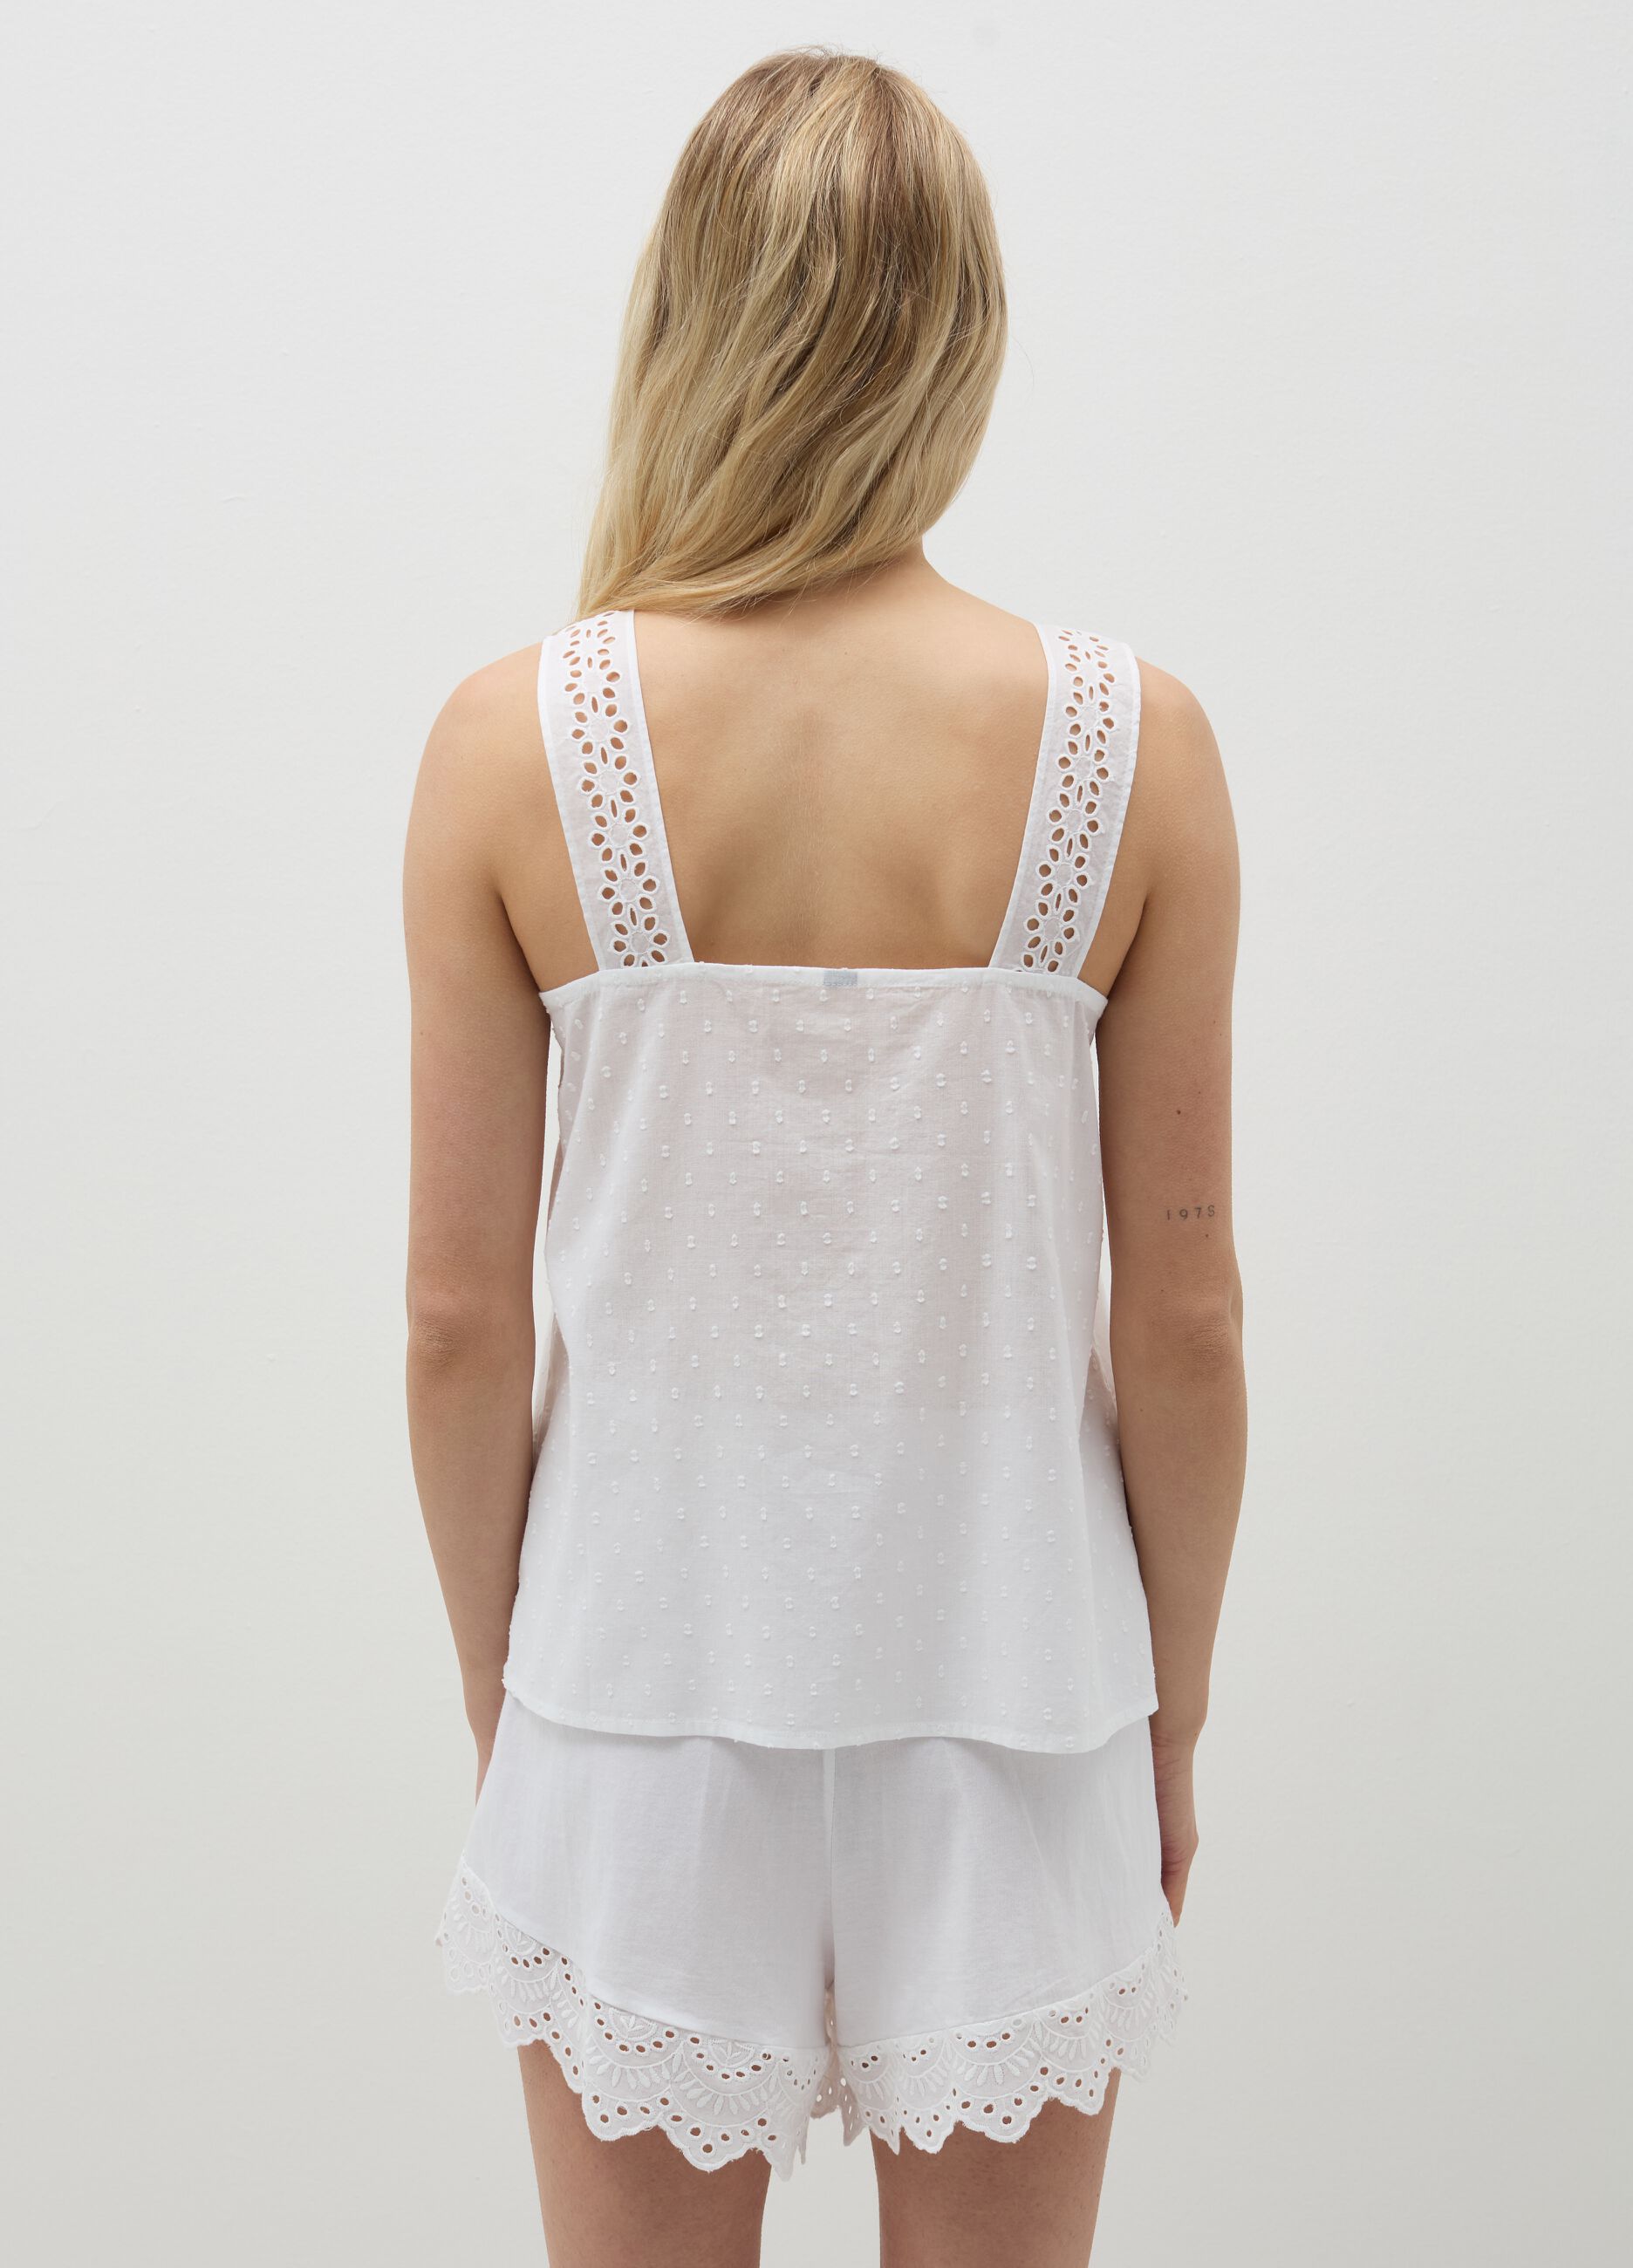 Pyjama top in cotton dobby with broderie anglaise